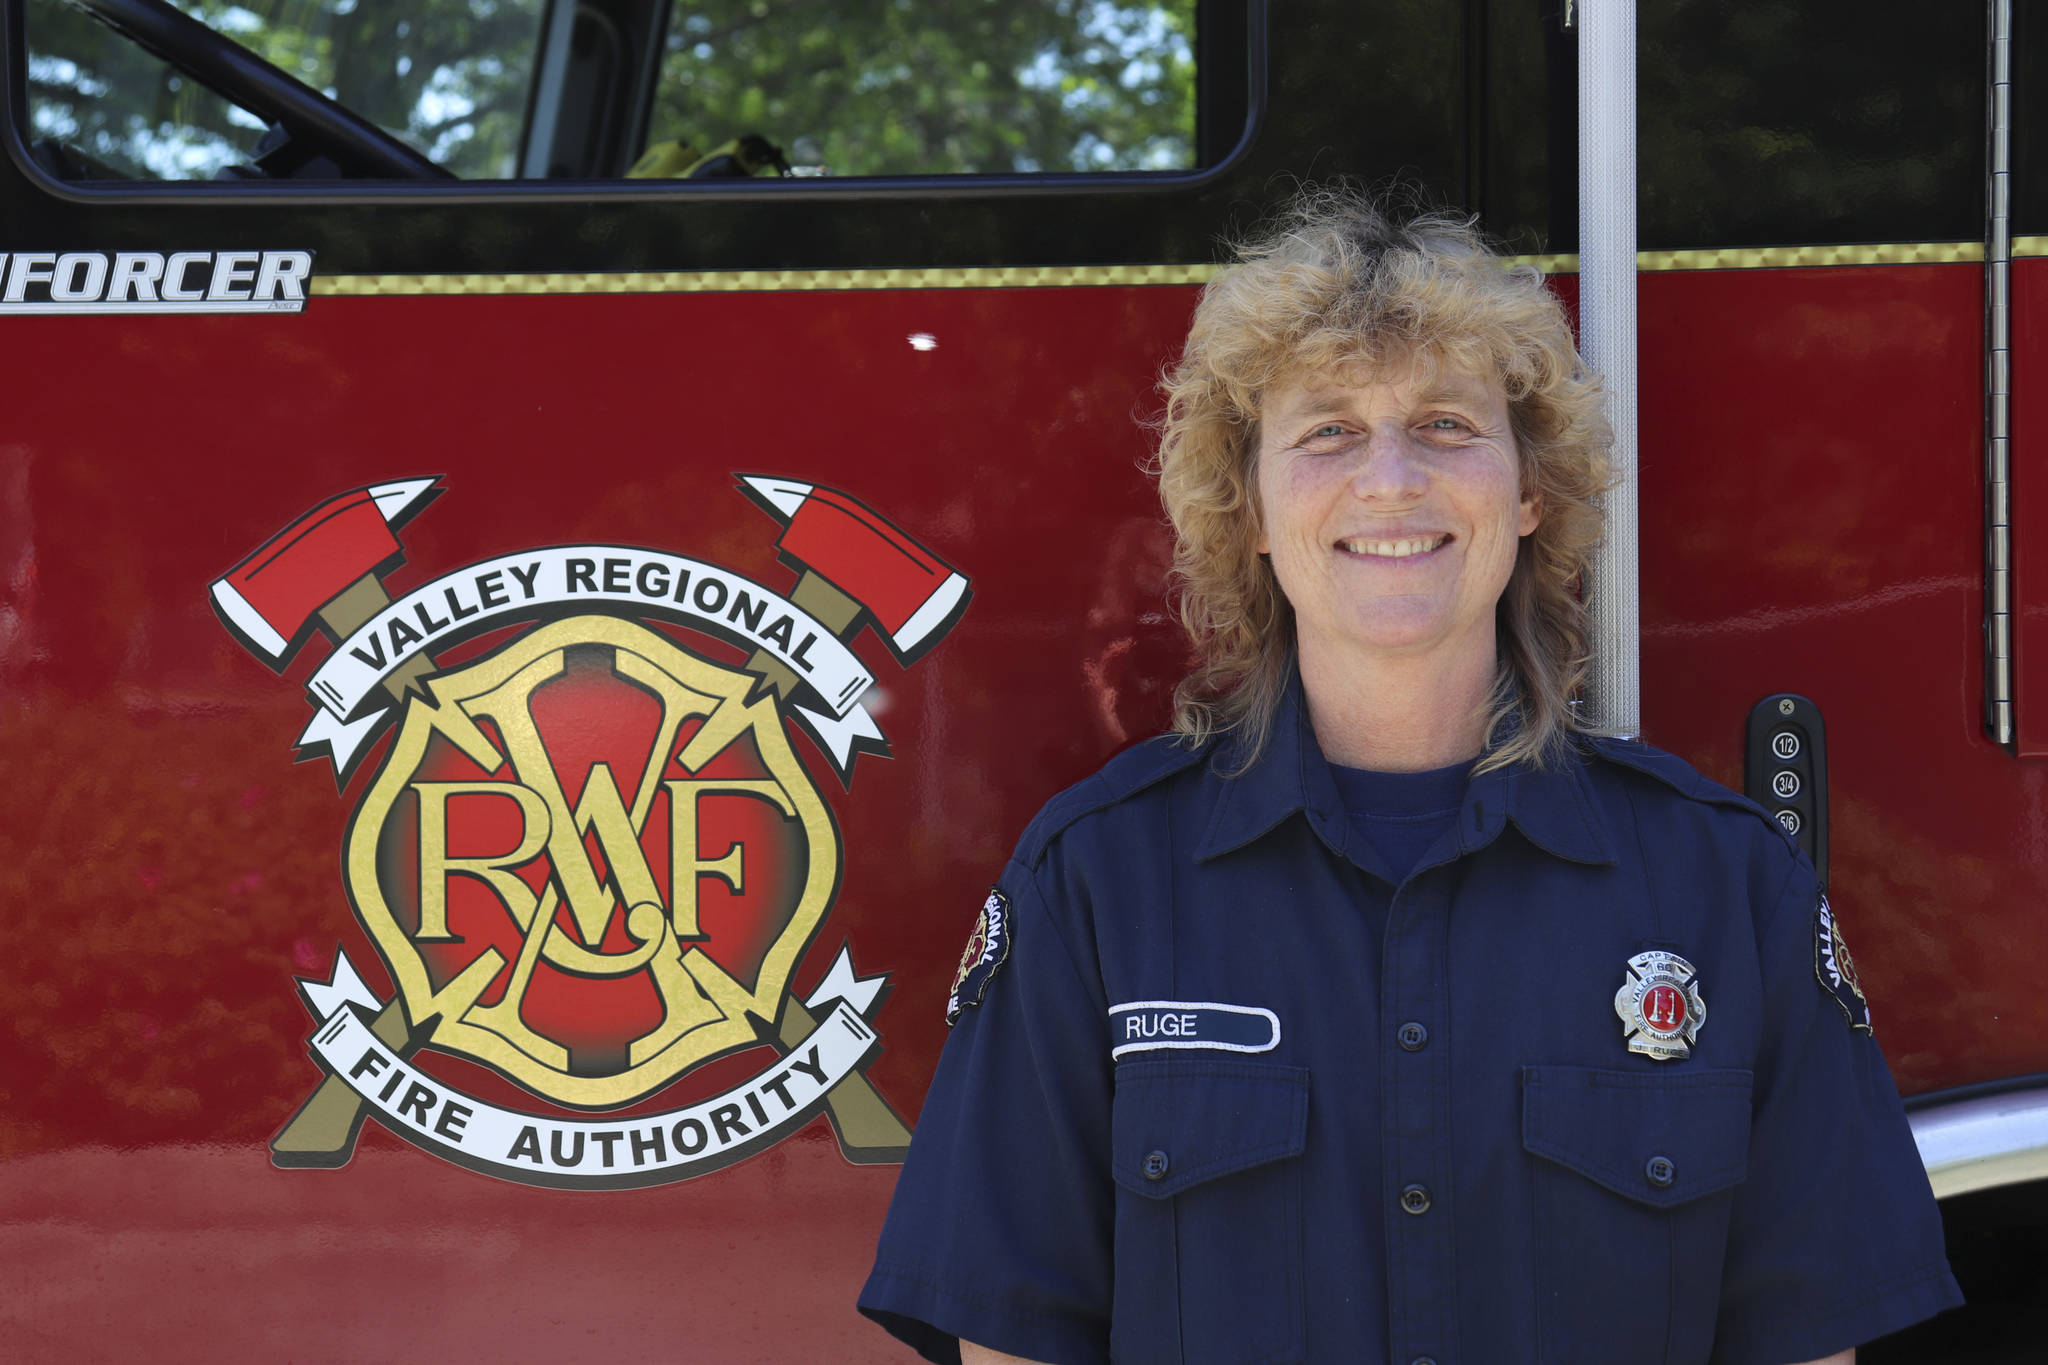 The Auburn Fire Department’s first female firefighter, Janeen Ruge, retired June 12 after 21 years on the job - 12 of them with the present-day Valley Regional Fire Authority. Courtesy photo